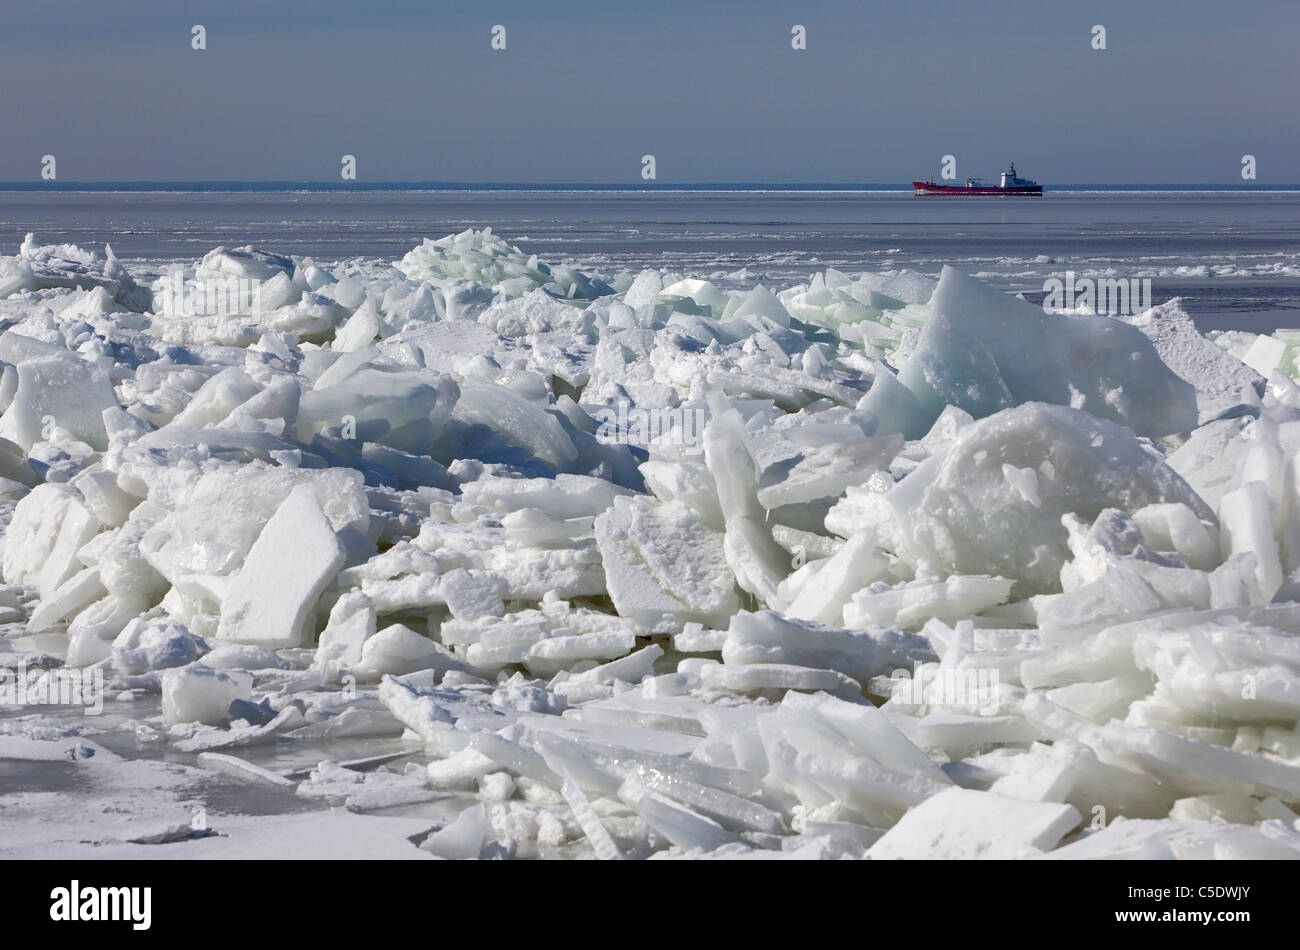 Ship at a distance in the Baltic sea against sky with ice blocks in foreground Stock Photo